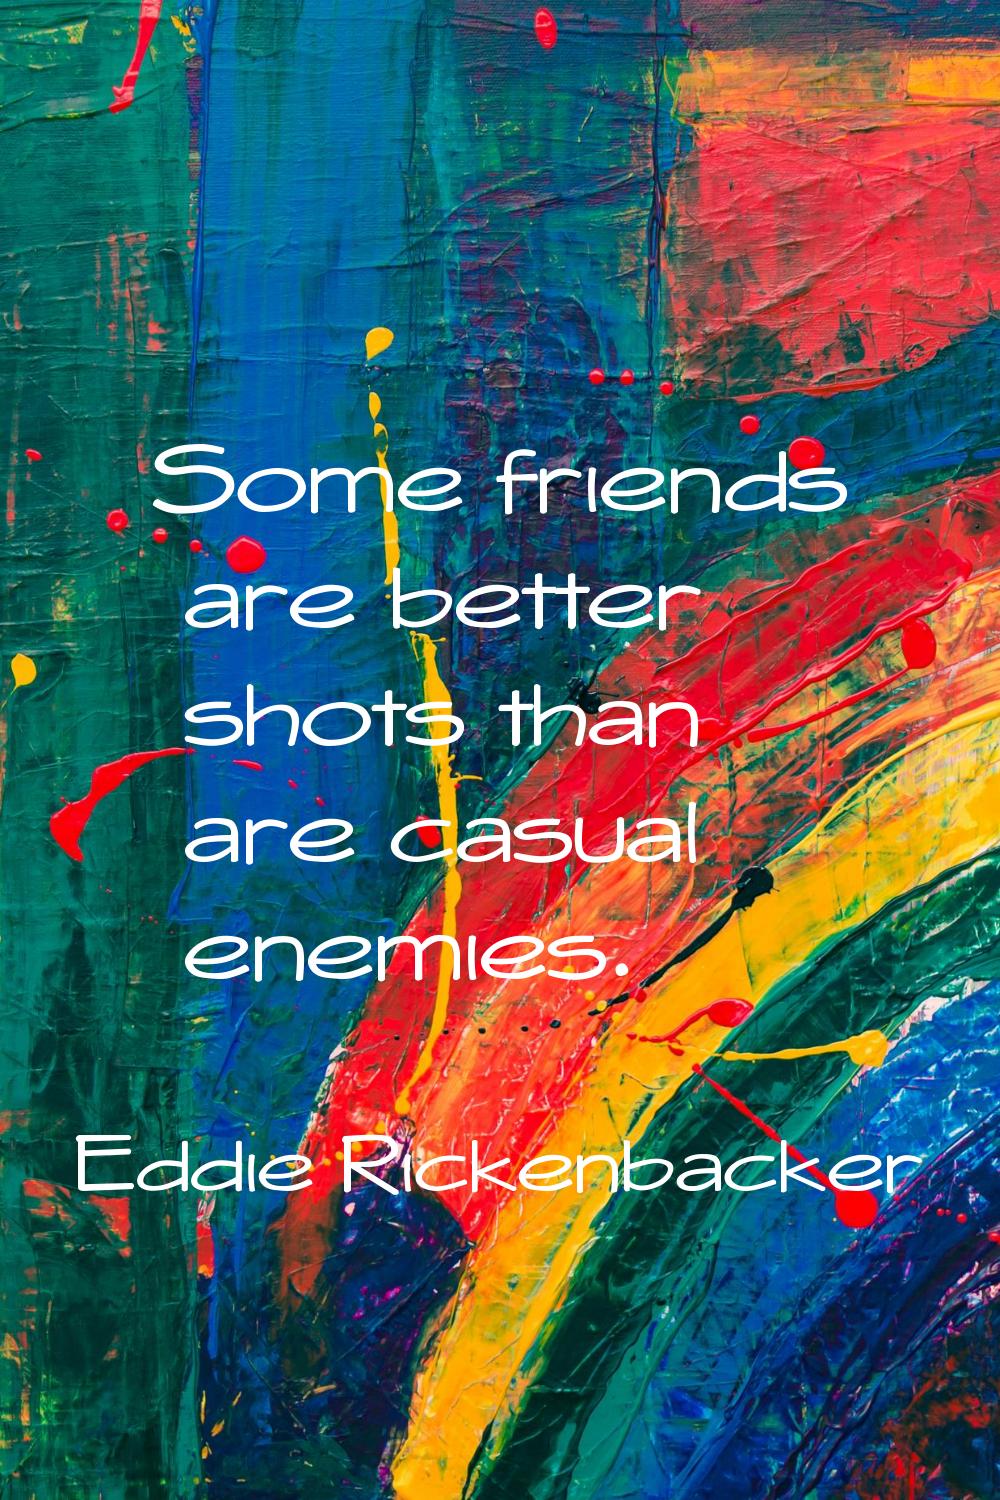 Some friends are better shots than are casual enemies.